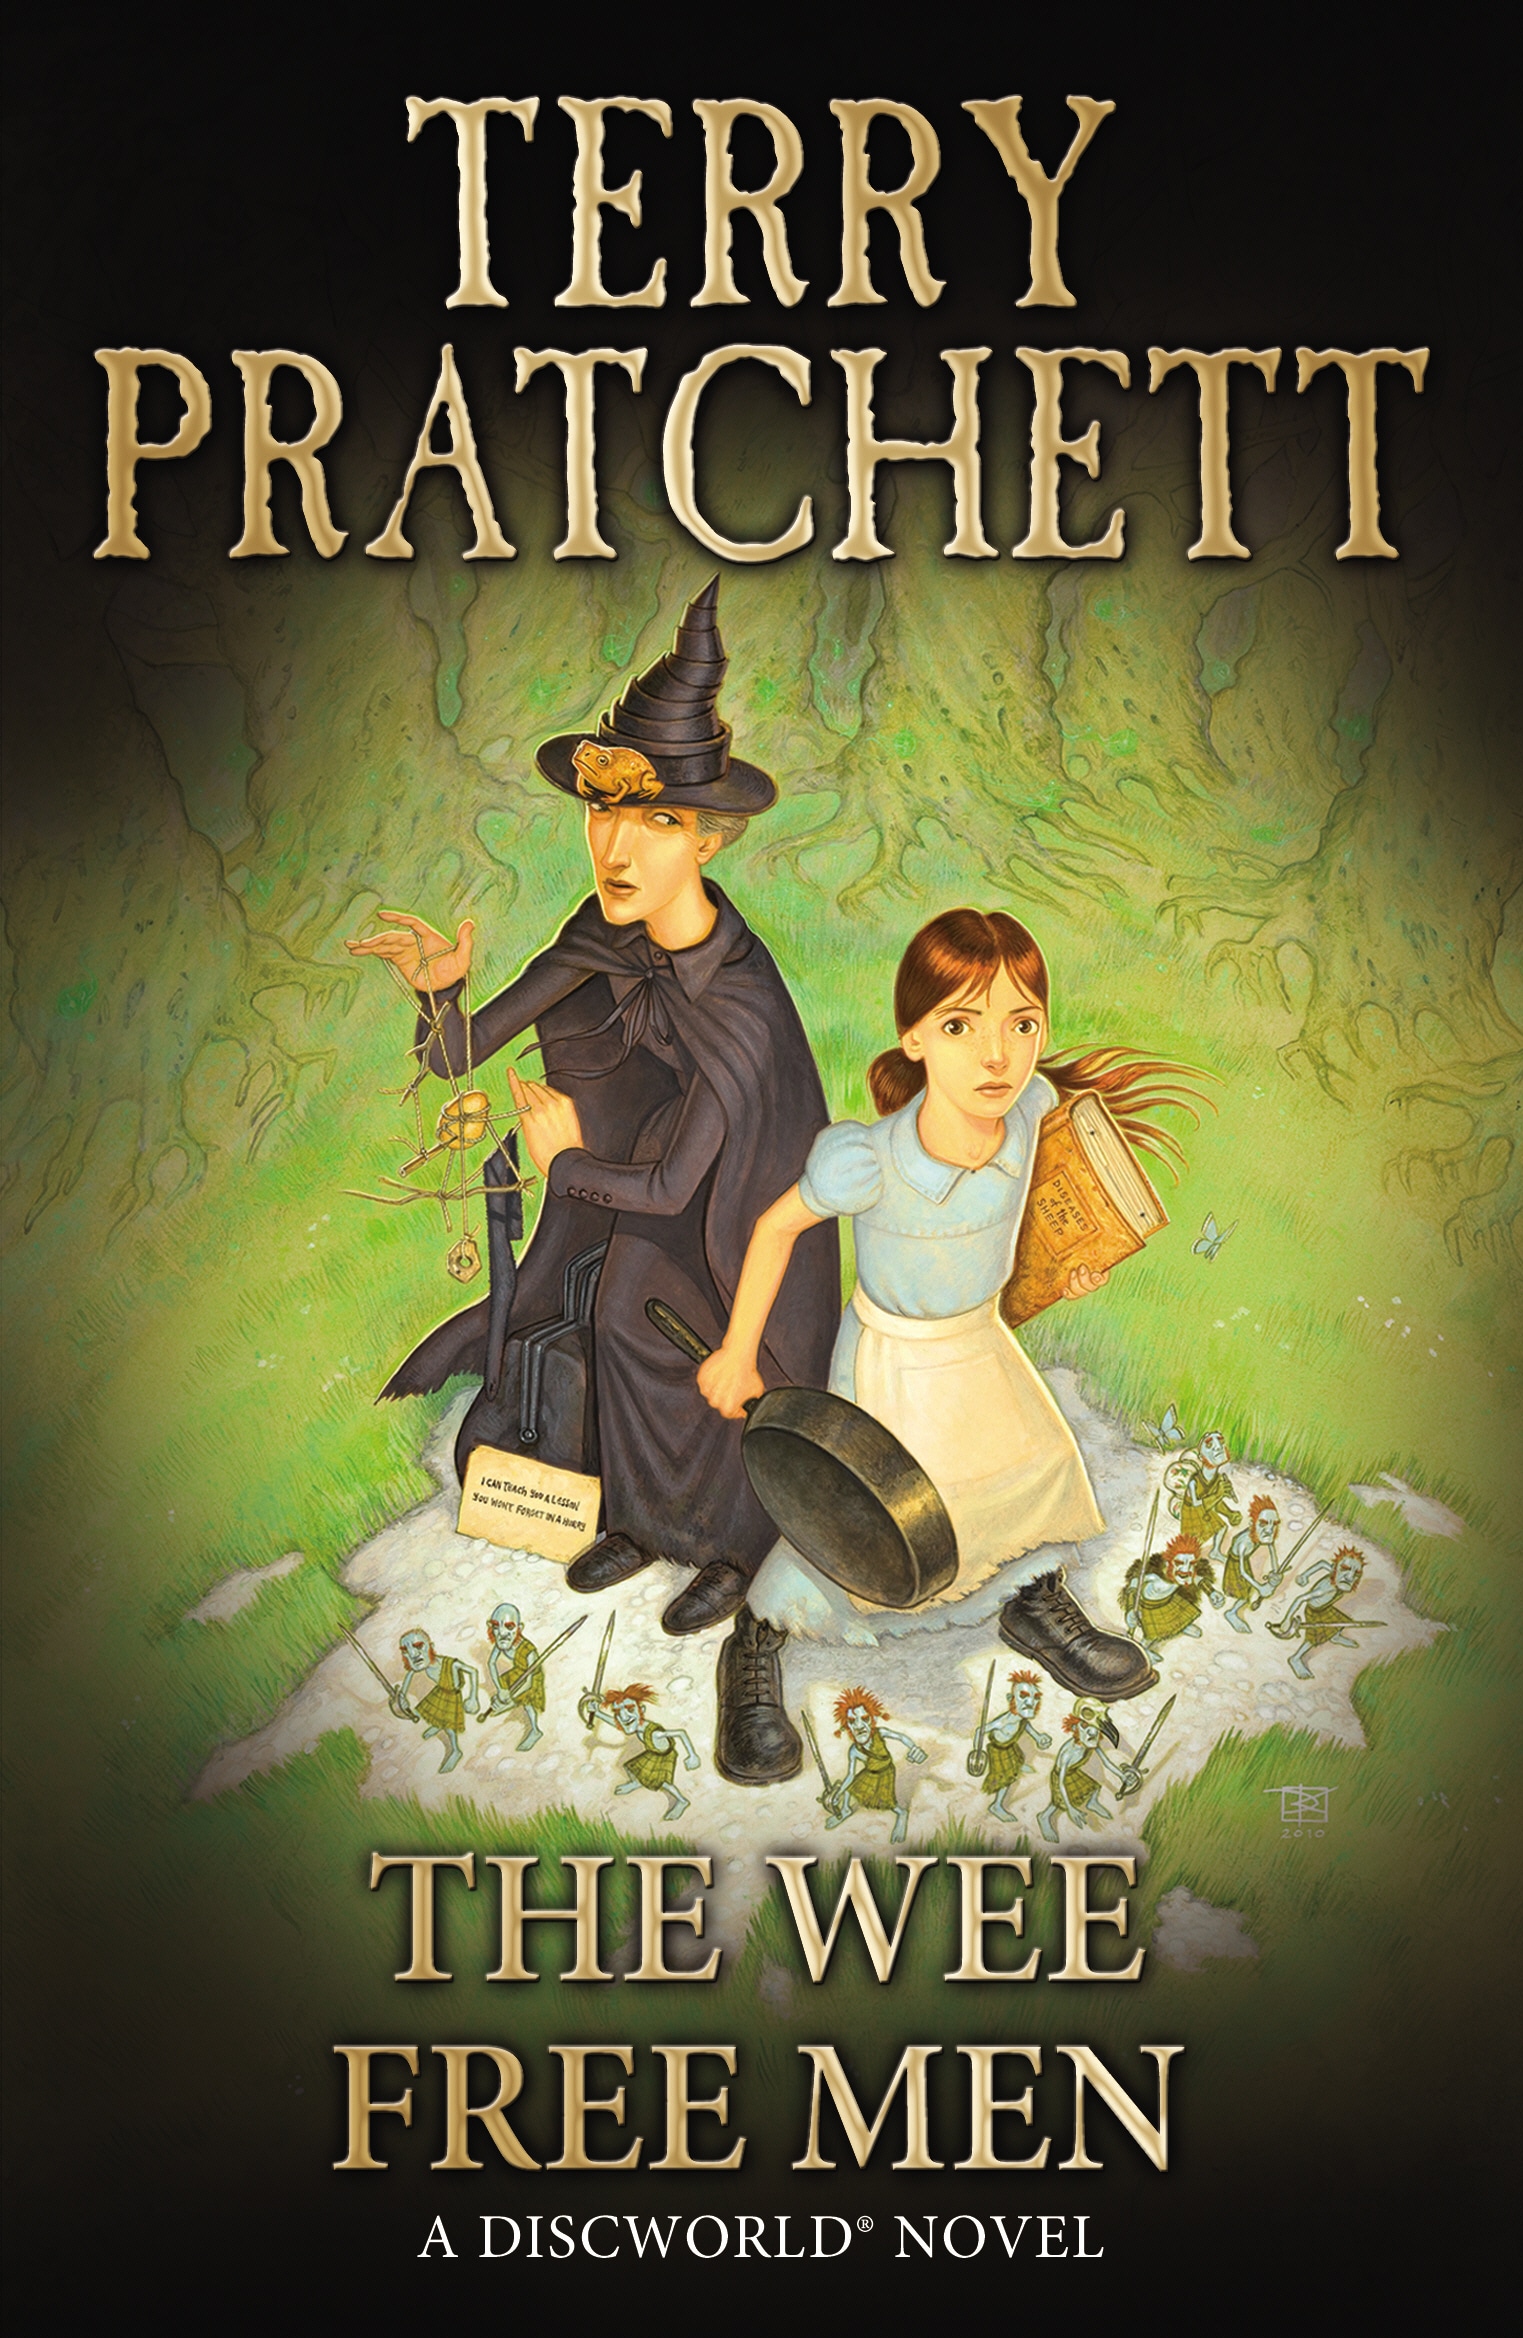 Book “The Wee Free Men” by Terry Pratchett — April 29, 2004